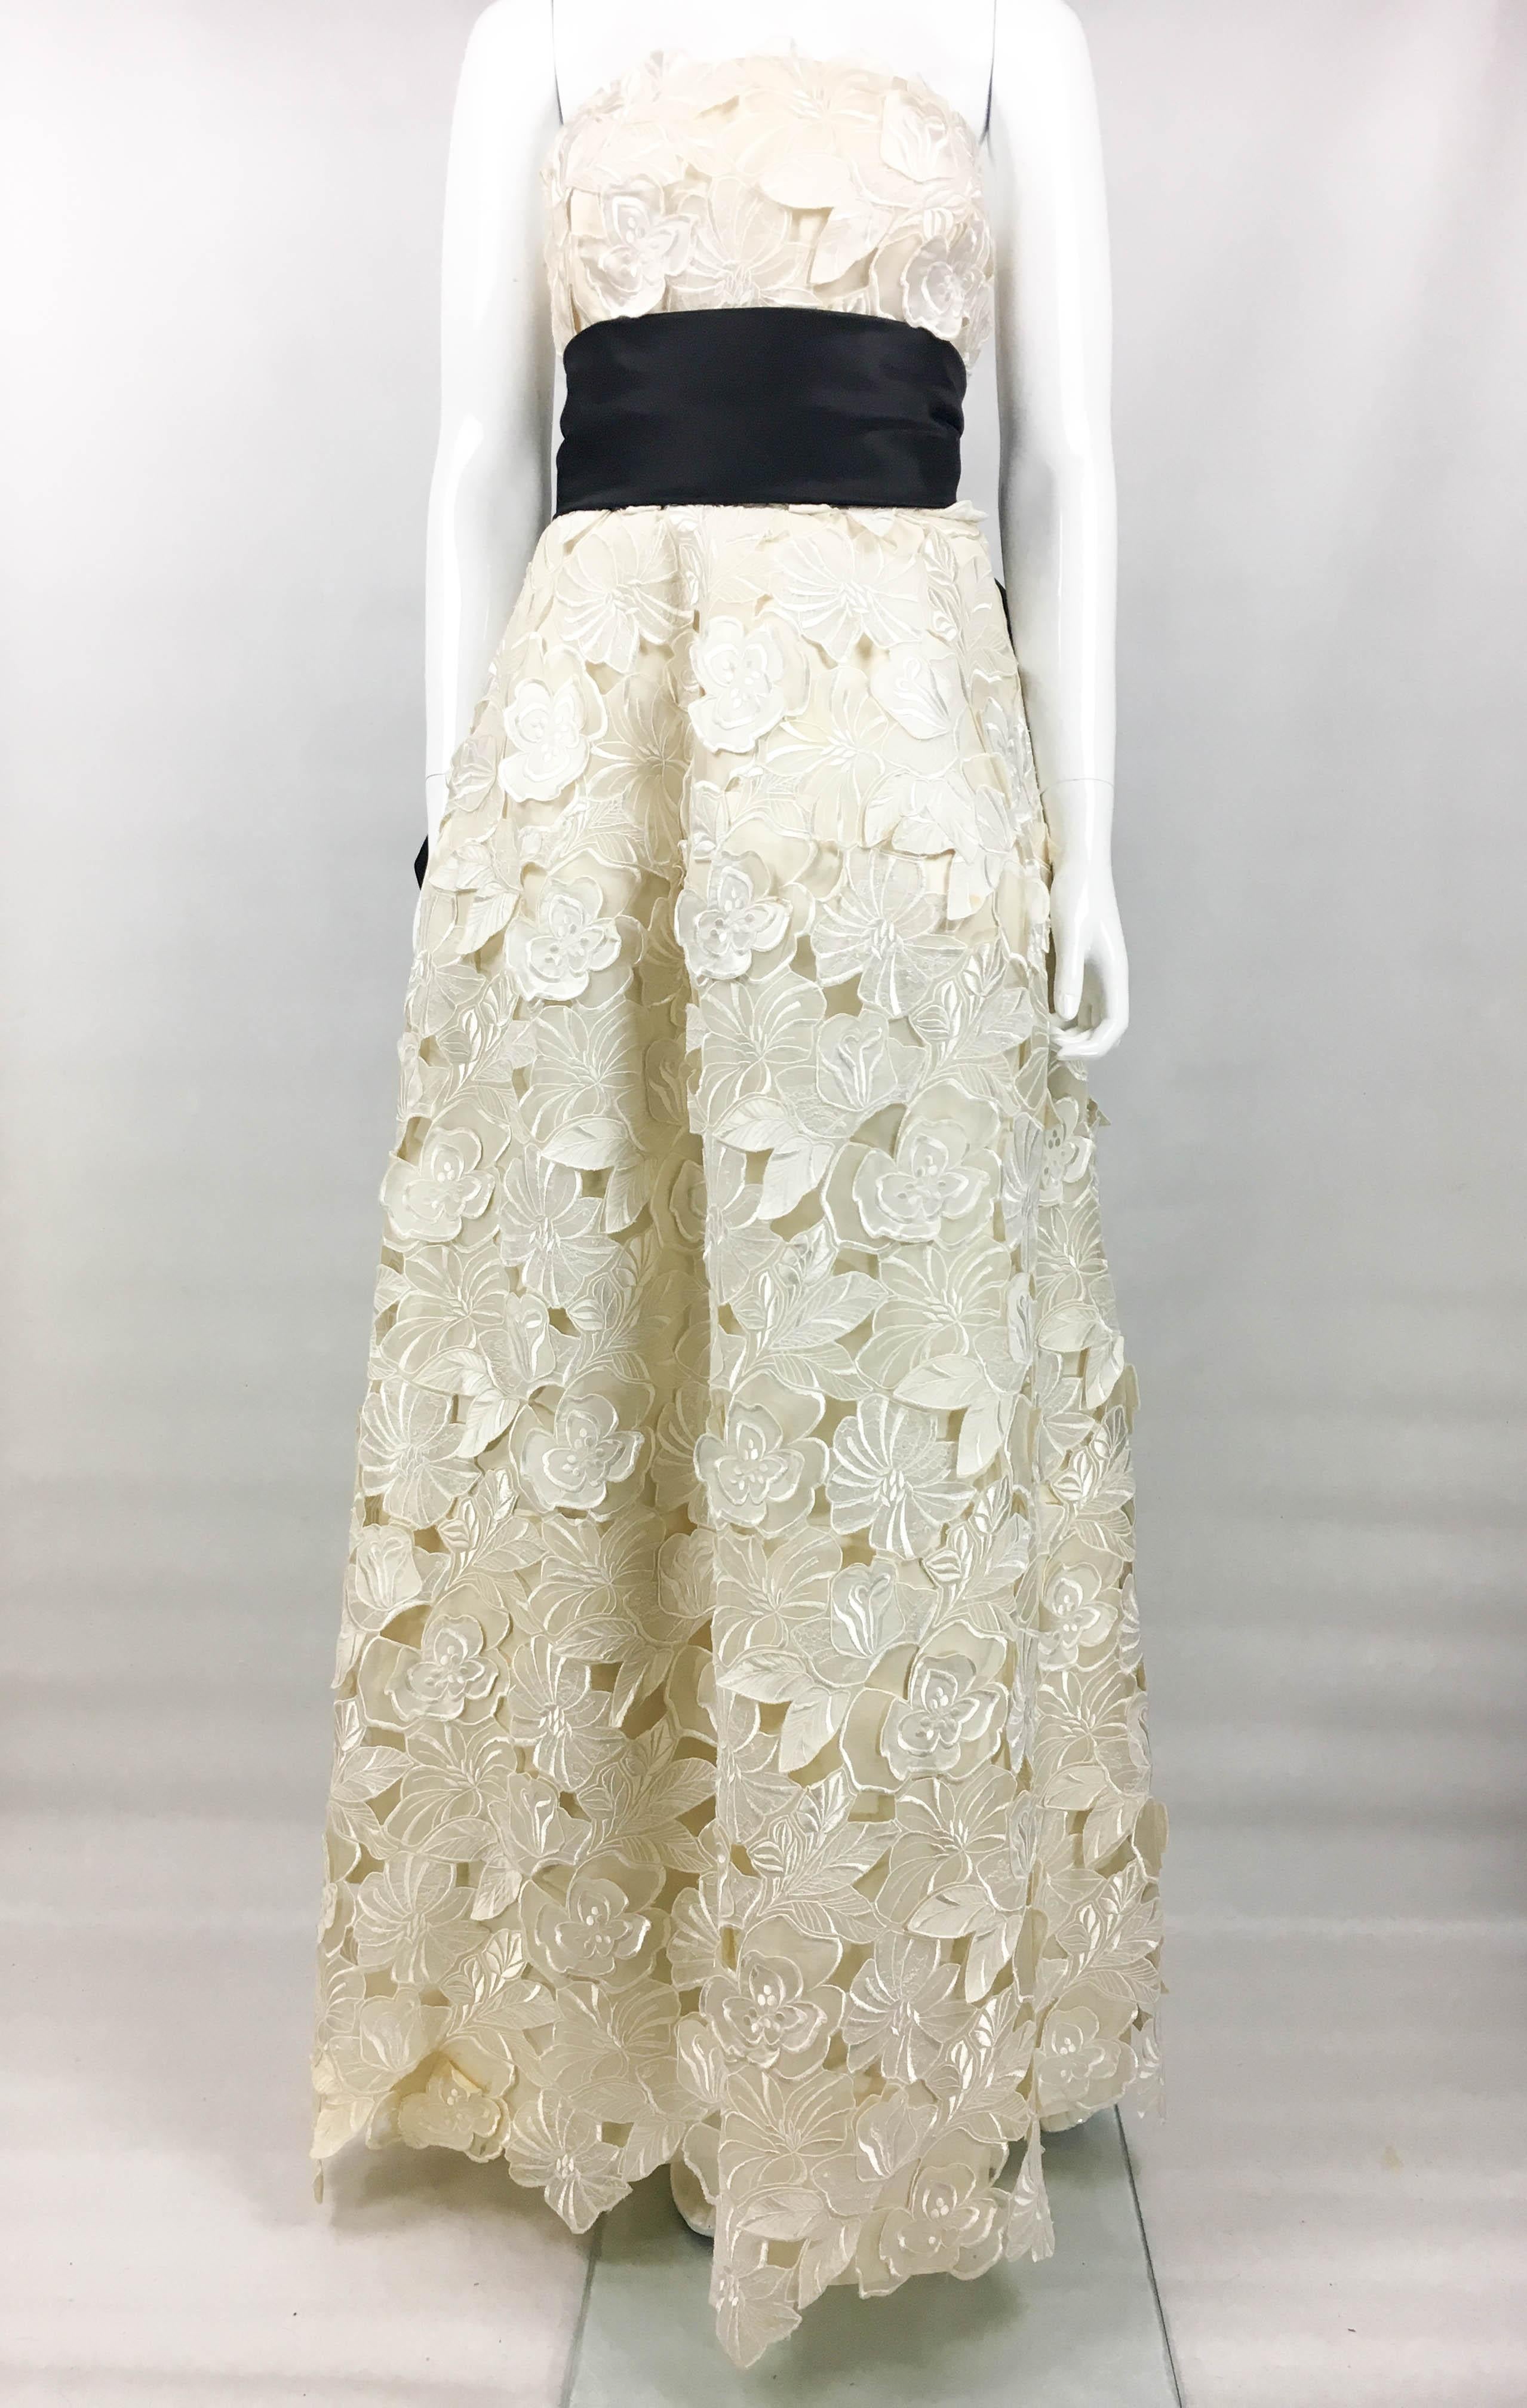 Vintage Givenchy Haute Couture Off-White Evening Gown. This stunning gown by Givenchy was crafted in 1985. Made in silk, it is over-layered with jacquard and embroidery flowers. The sleeveless design has a full floor-length skirt. Internally, it is